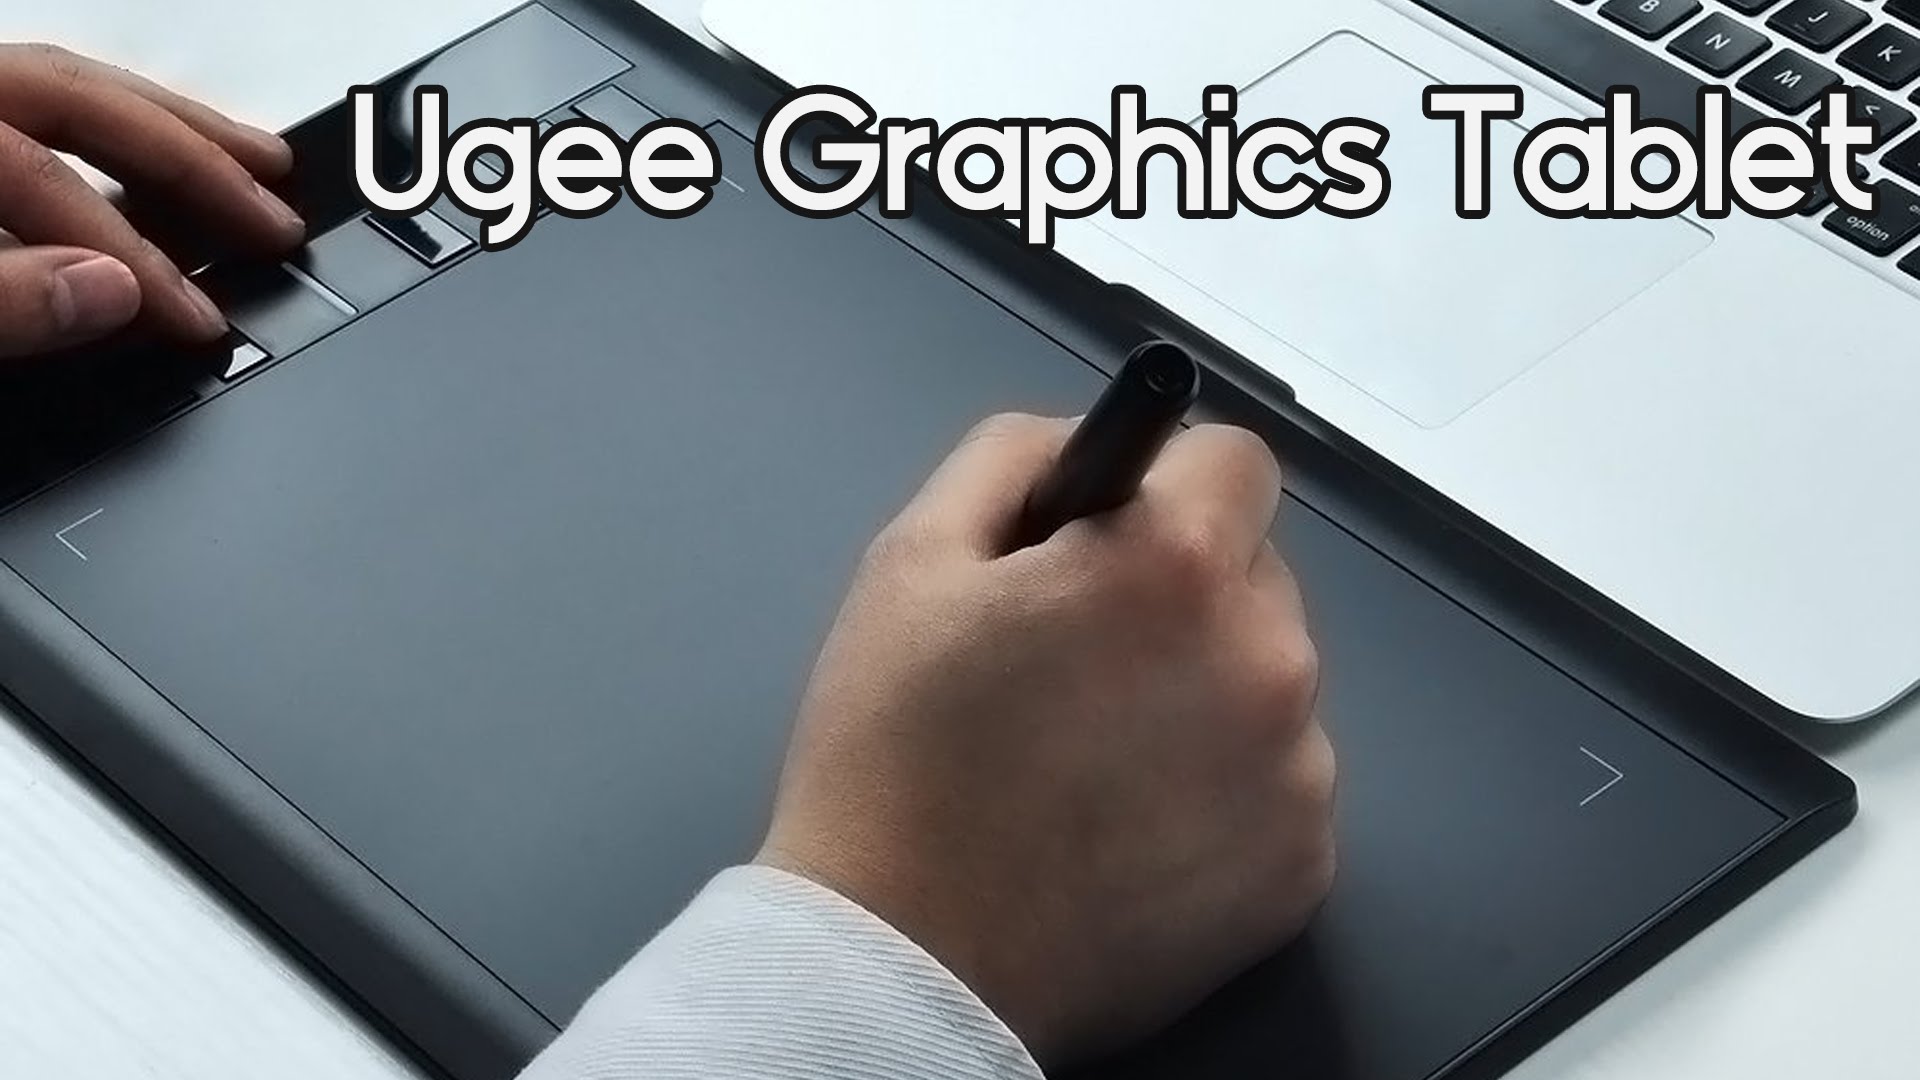 Review: Ugee M708 Graphics Tablet